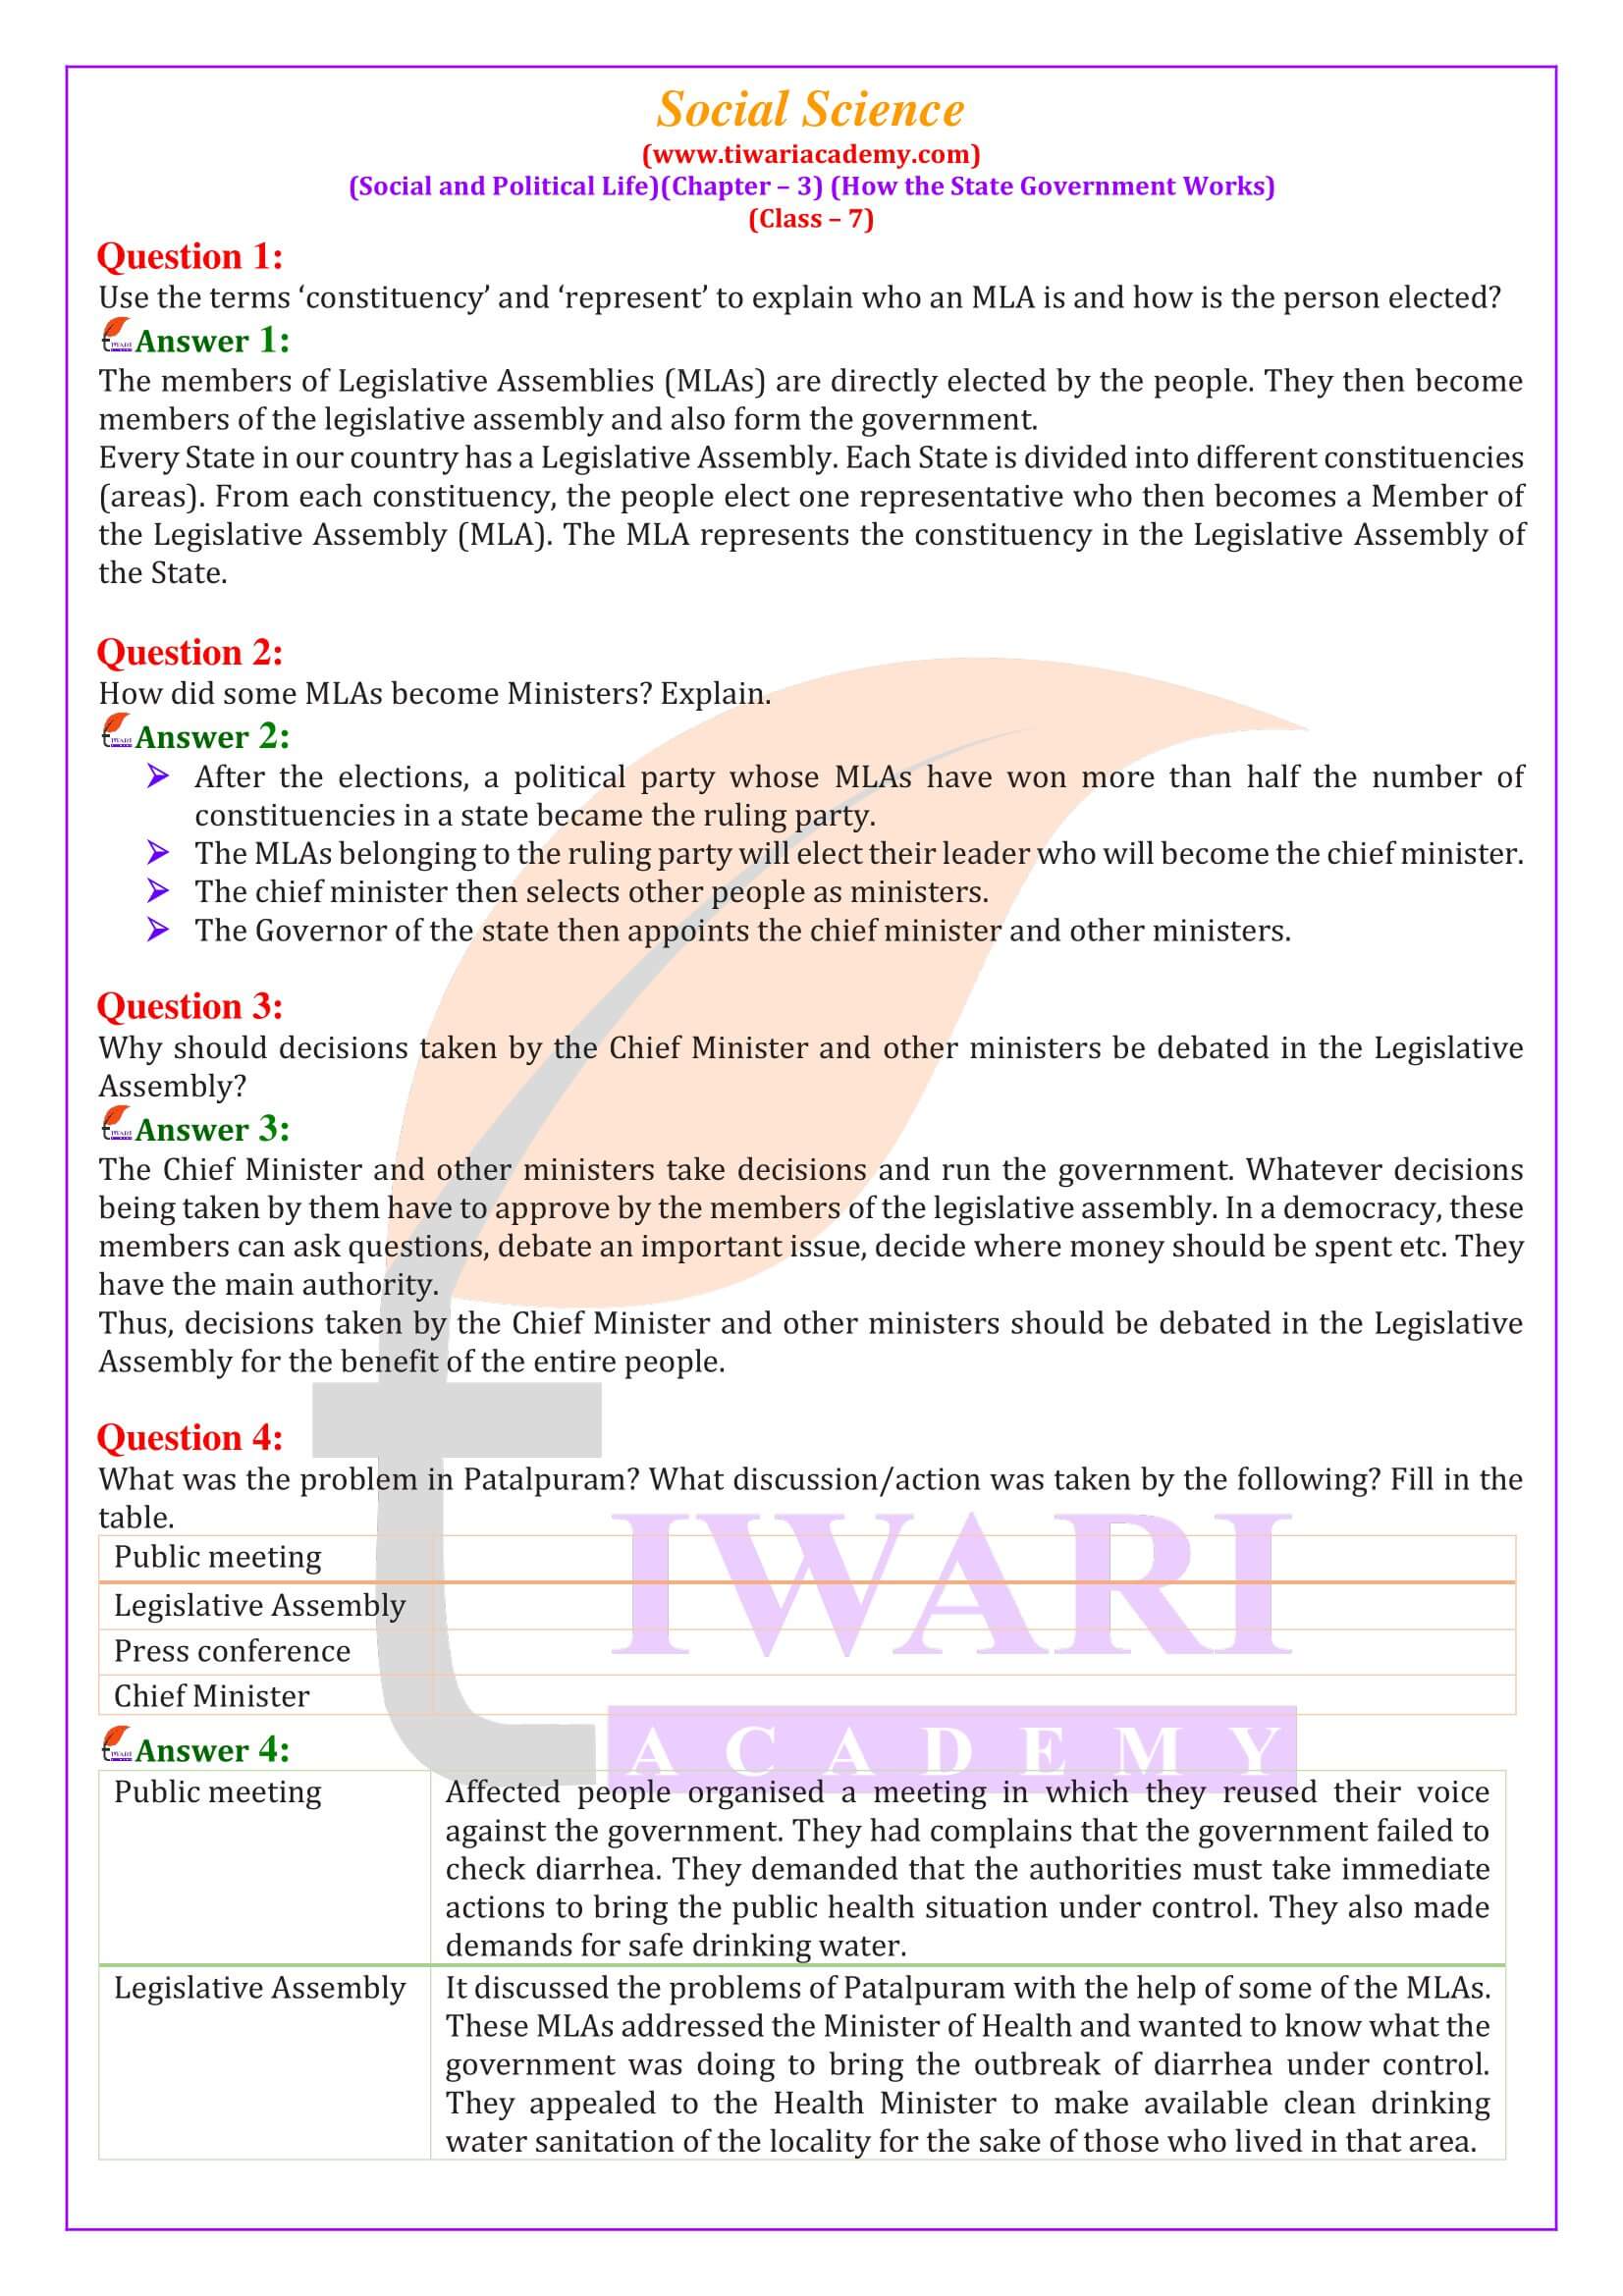 NCERT Solutions for Class 7 Social Science Civics Chapter 3